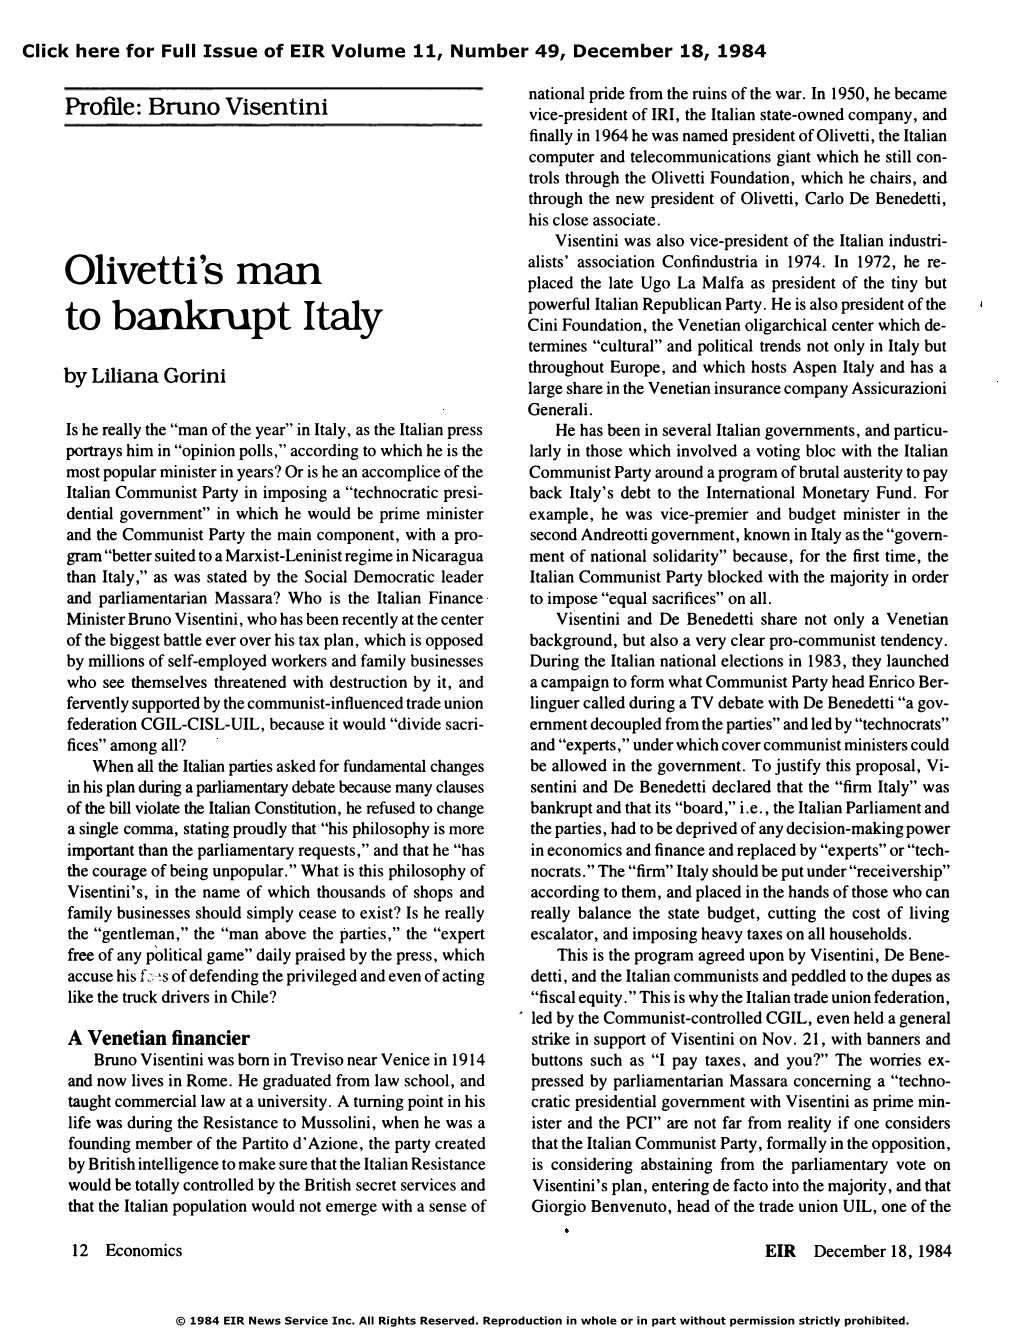 Olivetti's Man to Bankrupt Italy